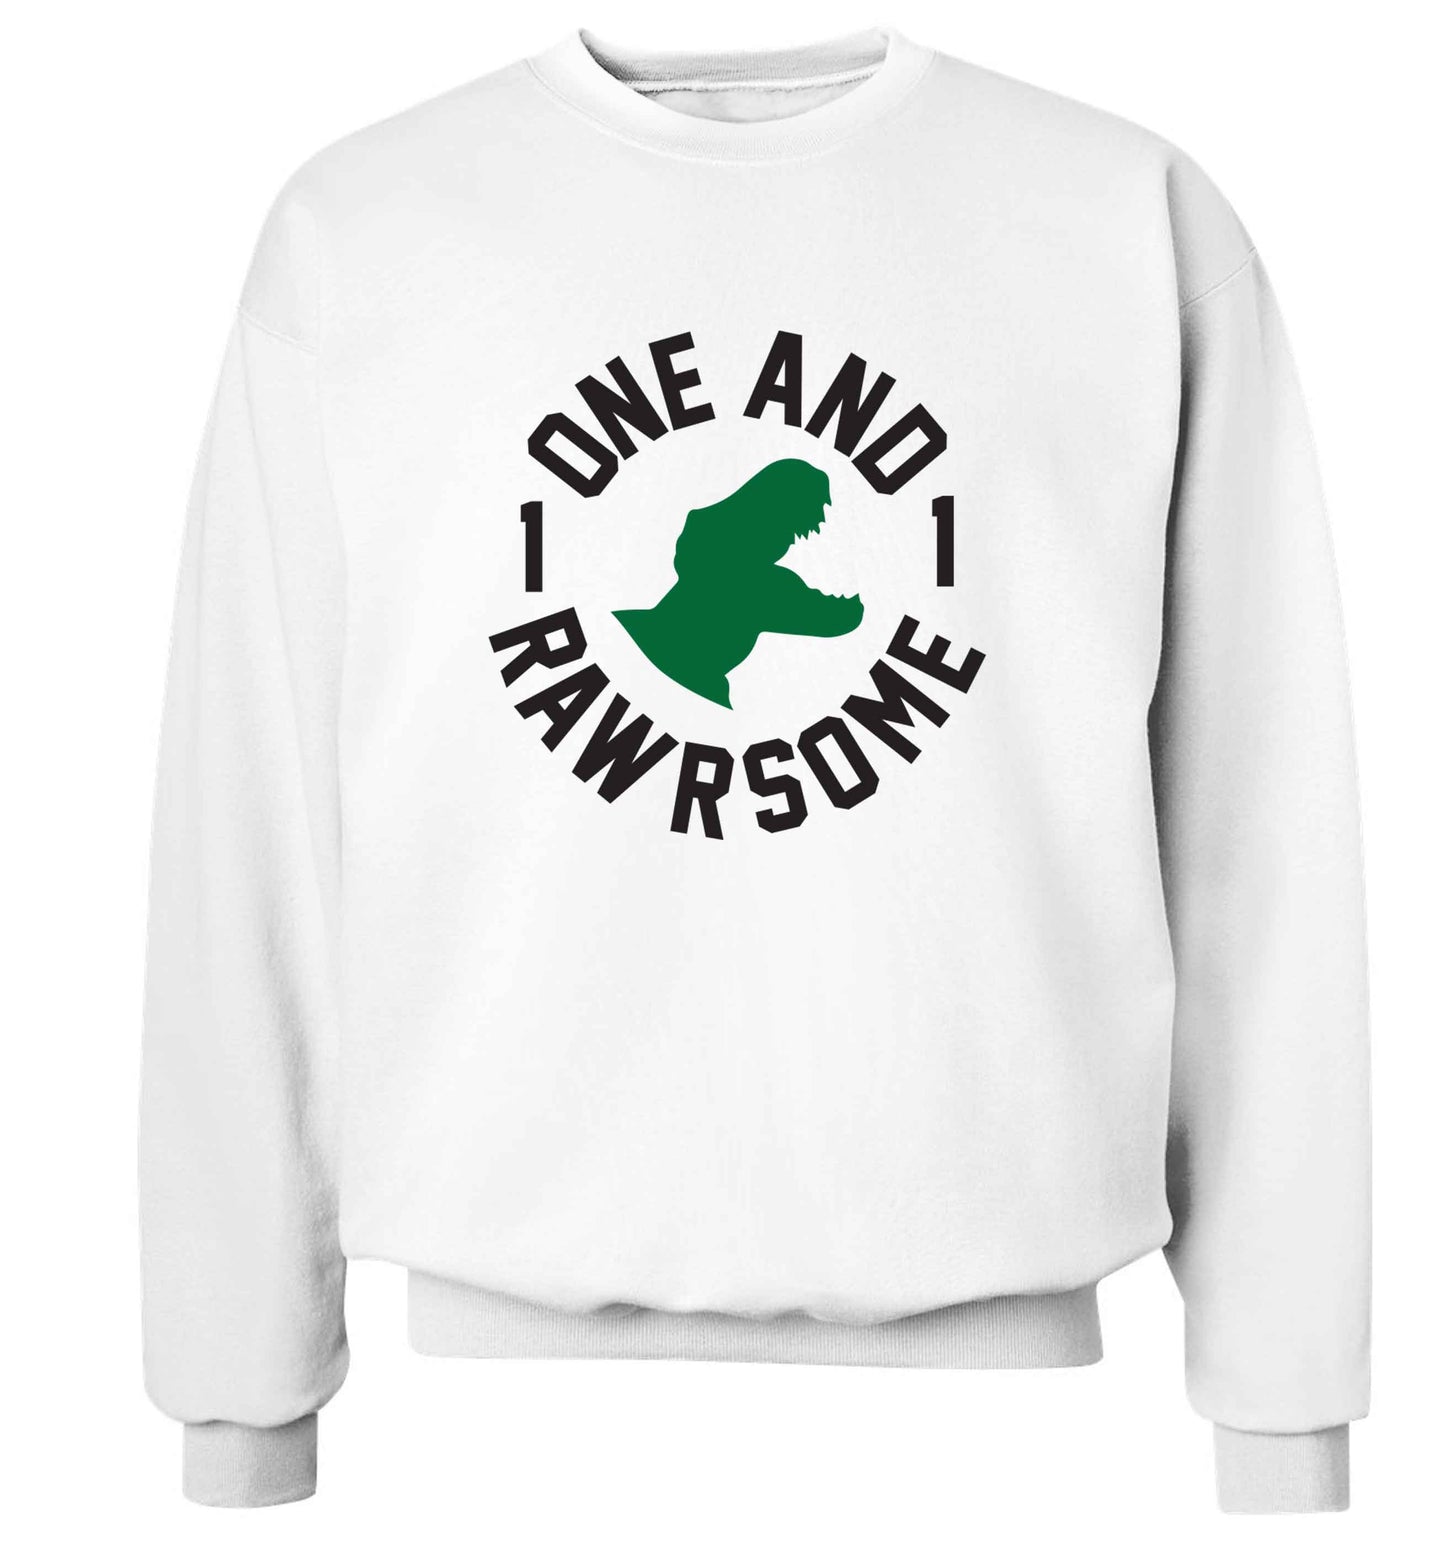 One and Rawrsome adult's unisex white sweater 2XL